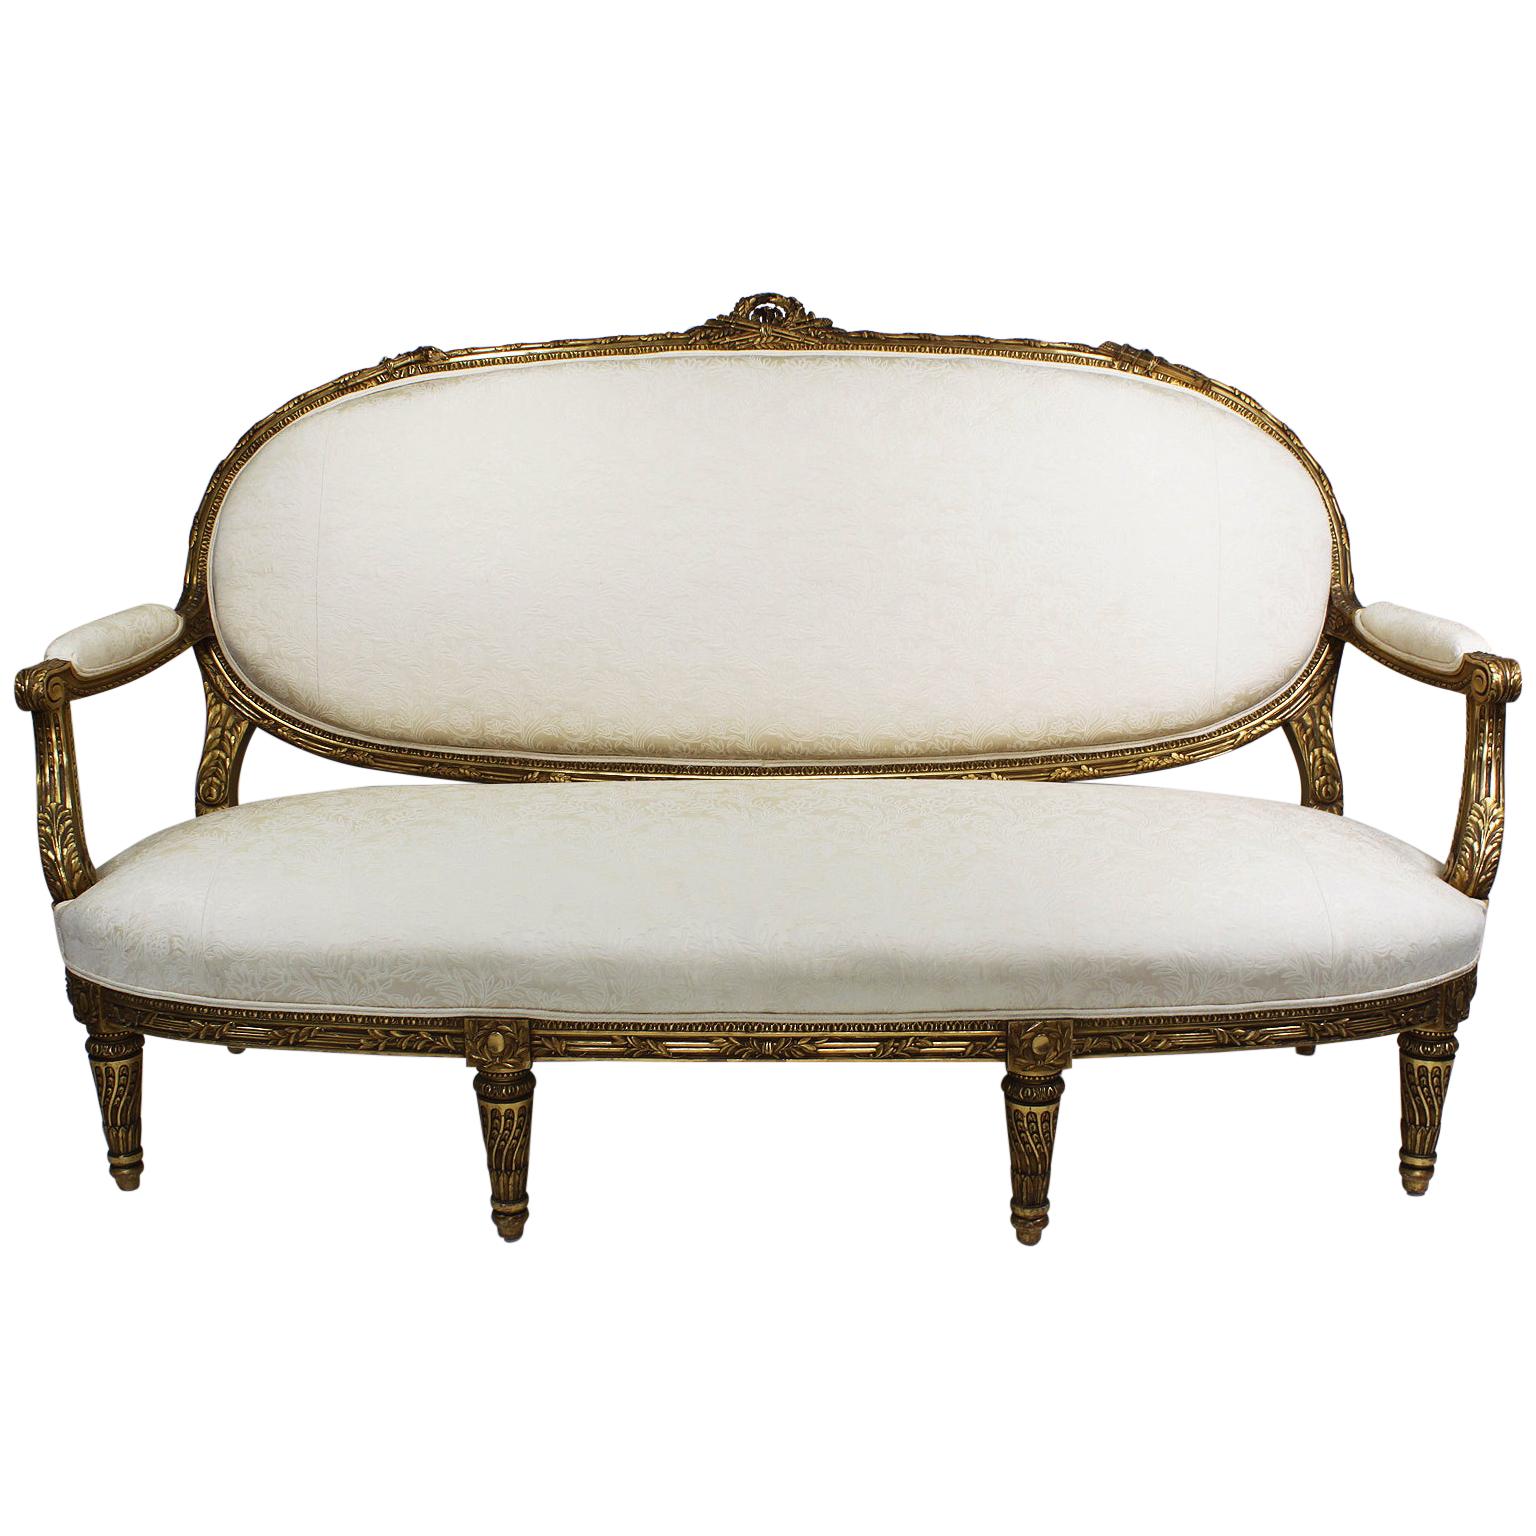 French 19th-20th Century Louis XVI Style Giltwood Carved Settee, François Linke For Sale